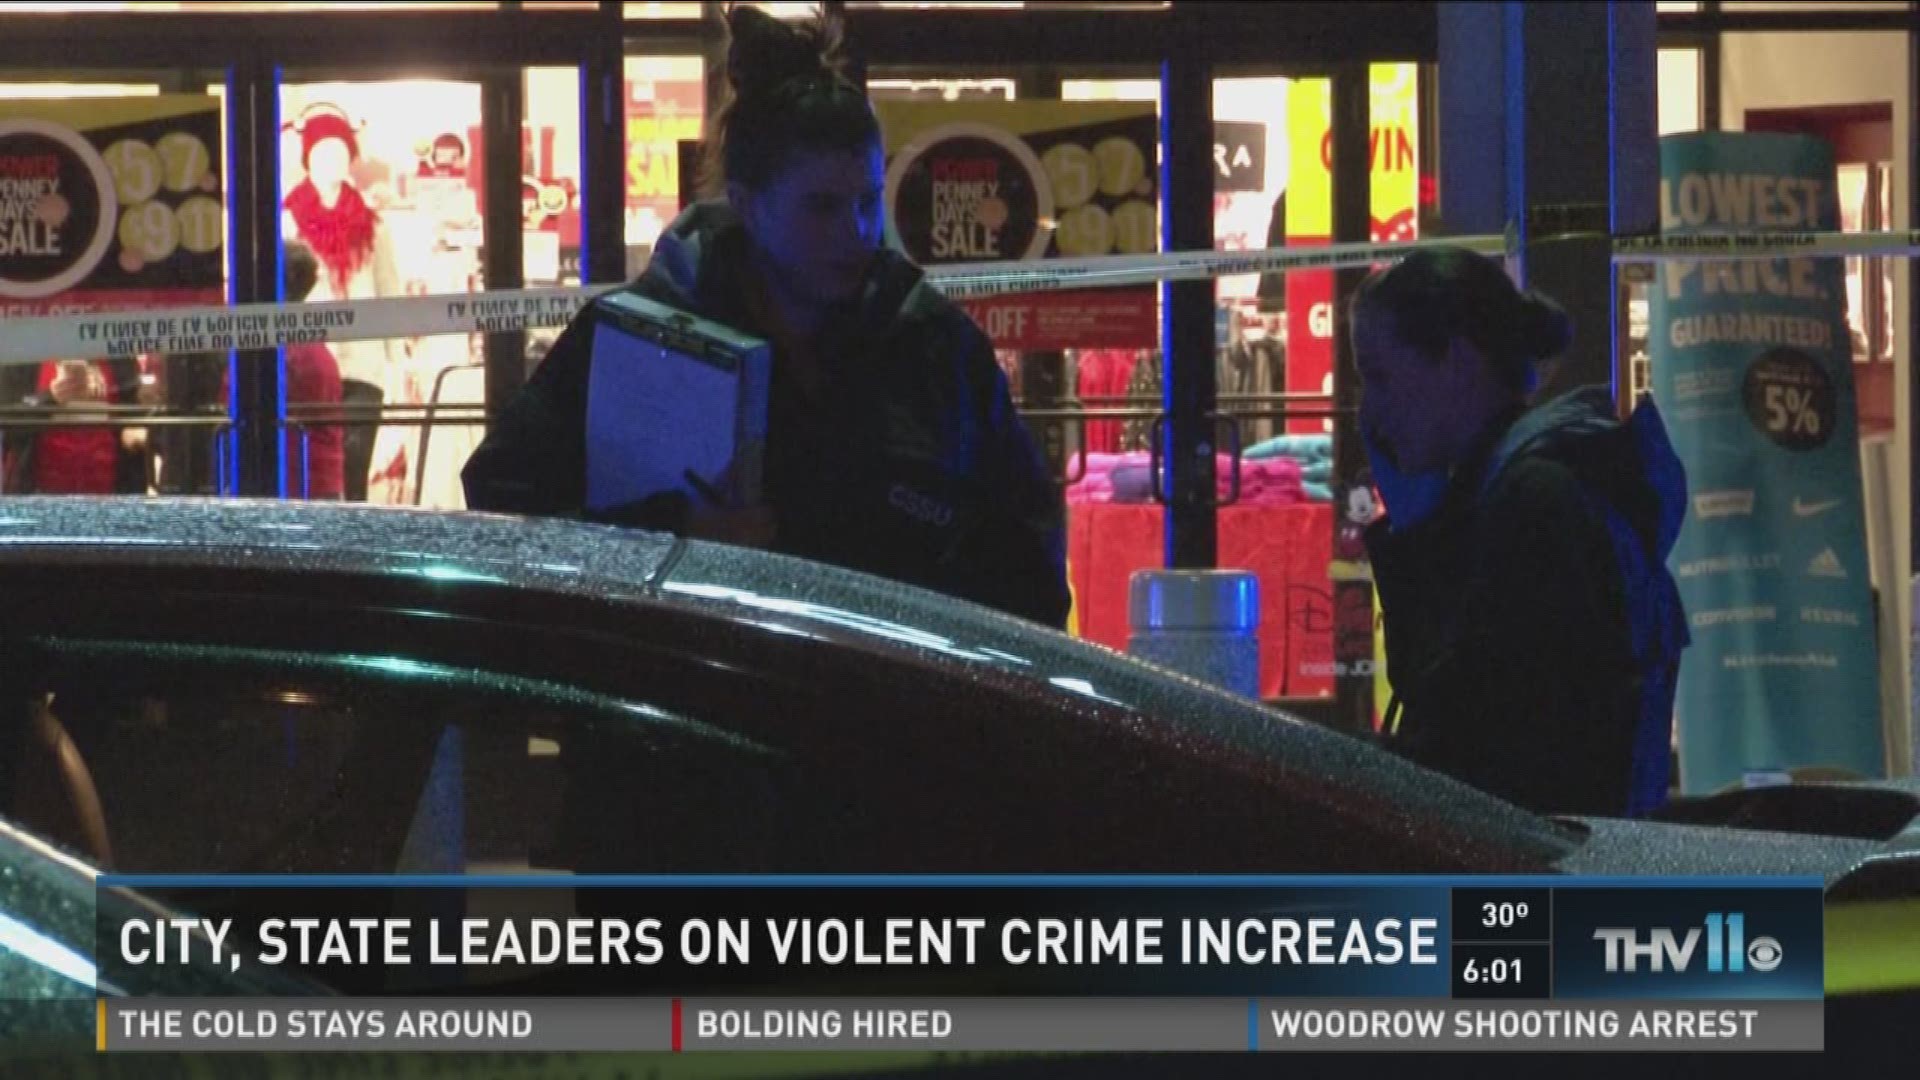 City, state leaders on violent crime increase